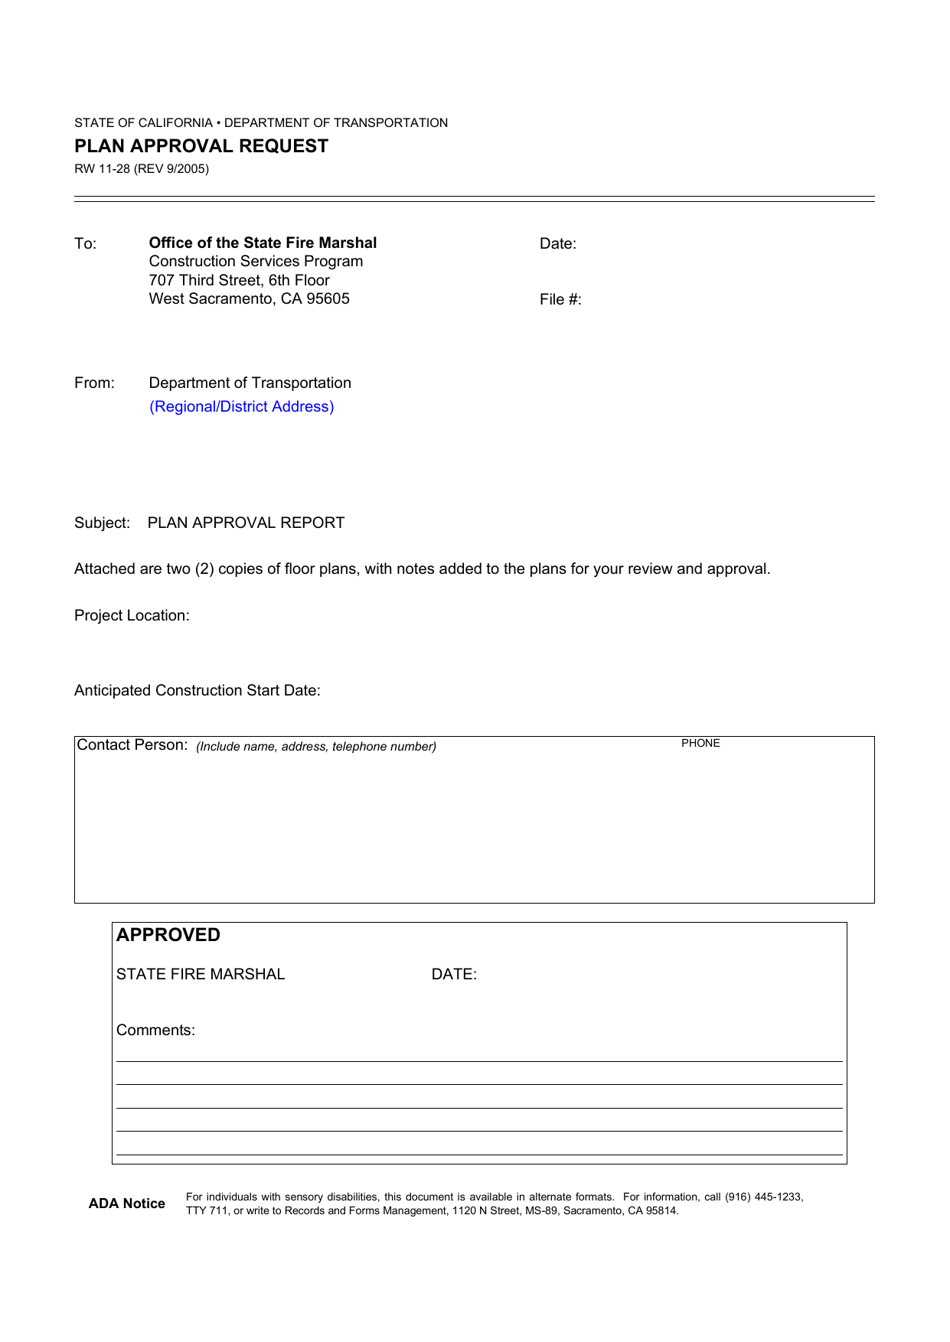 Form RW11-28 Plan Approval Request - California, Page 1